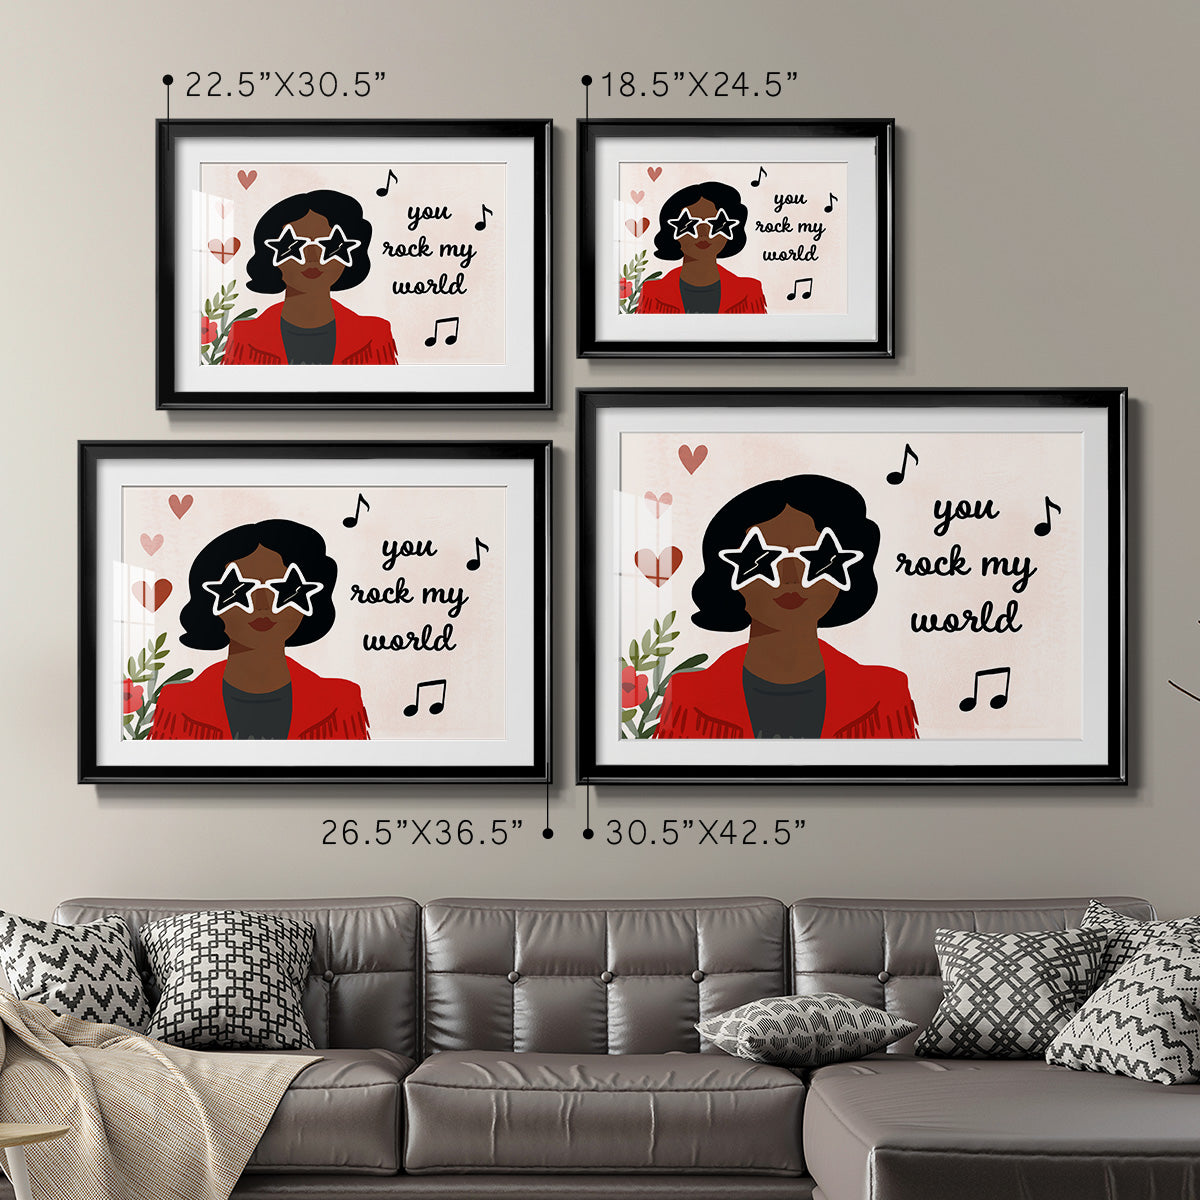 Darling Valentine Collection A Premium Framed Print - Ready to Hang